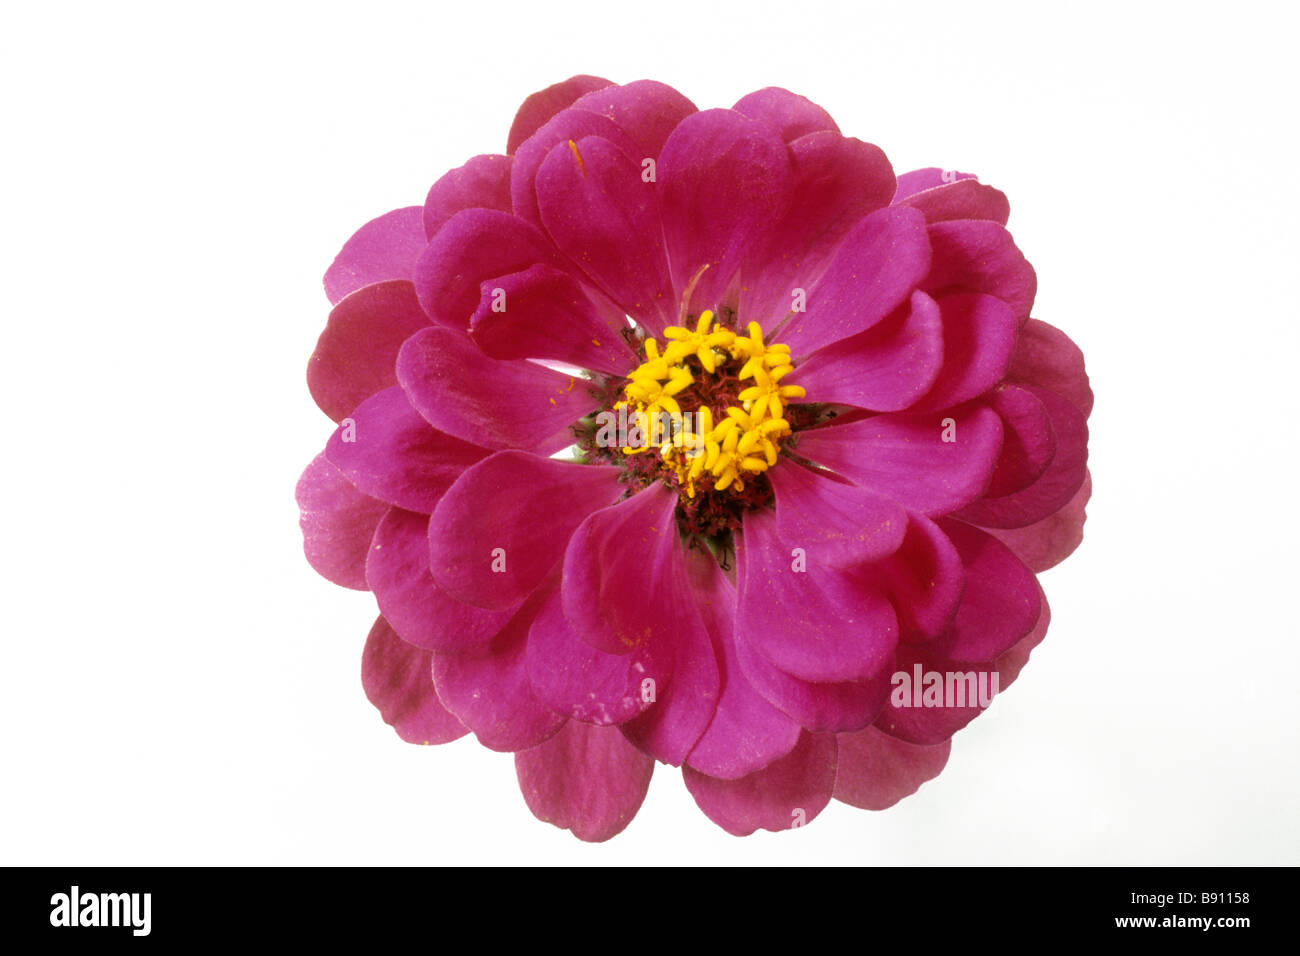 Youth-and-old-age (Zinnia elegans), variety: Liliput, flower, studio picture Stock Photo